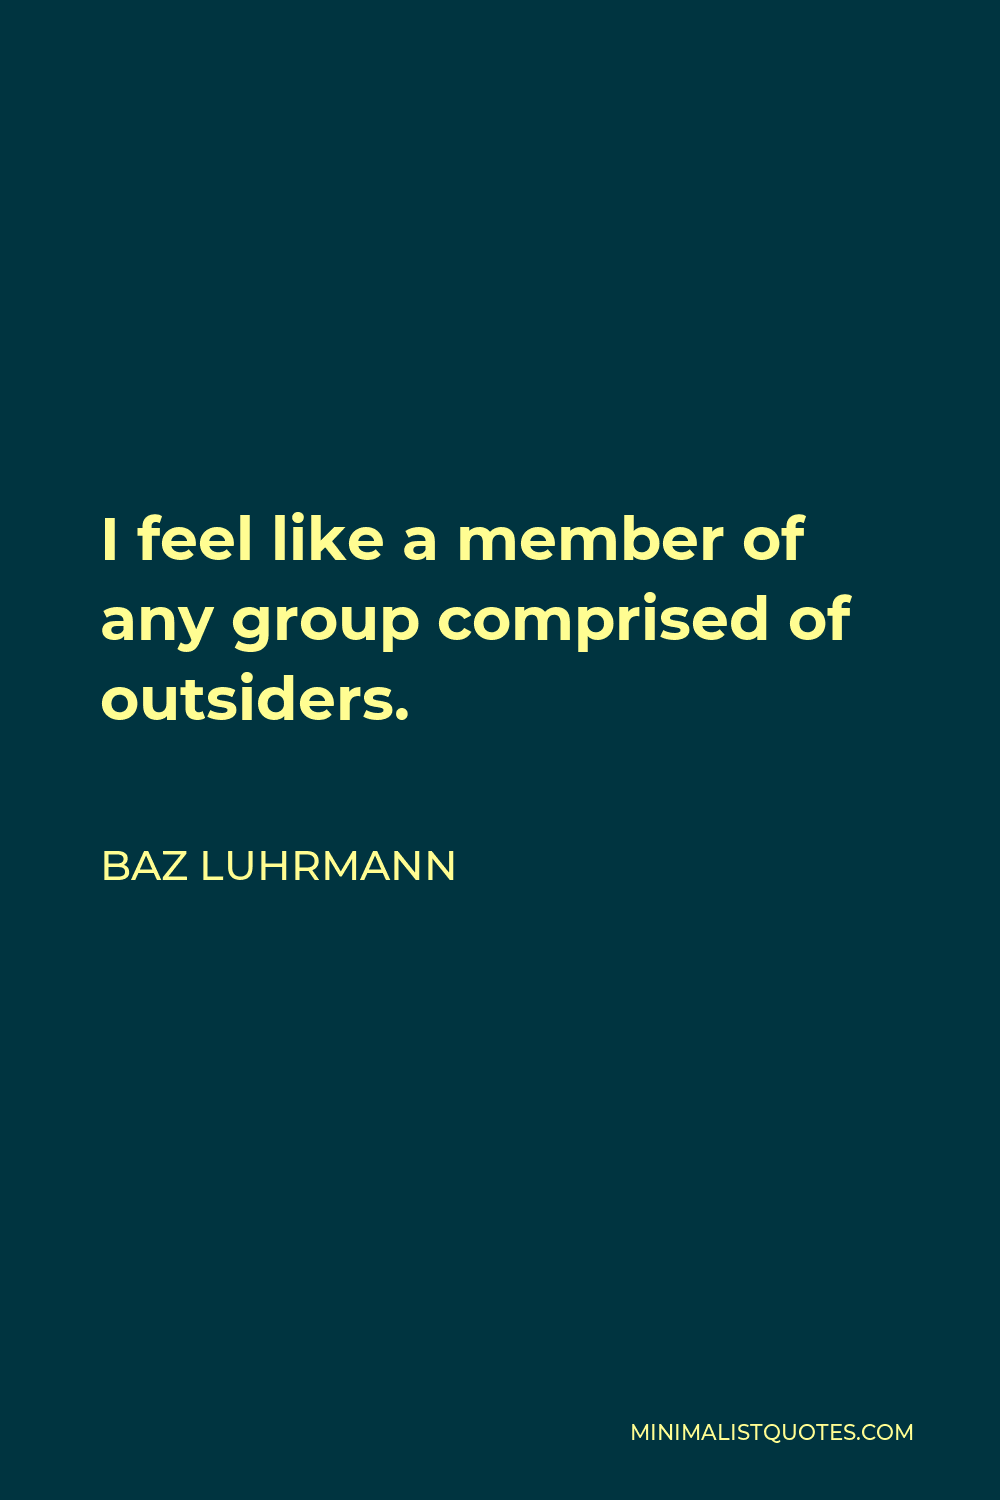 Baz Luhrmann Quote - I feel like a member of any group comprised of outsiders.